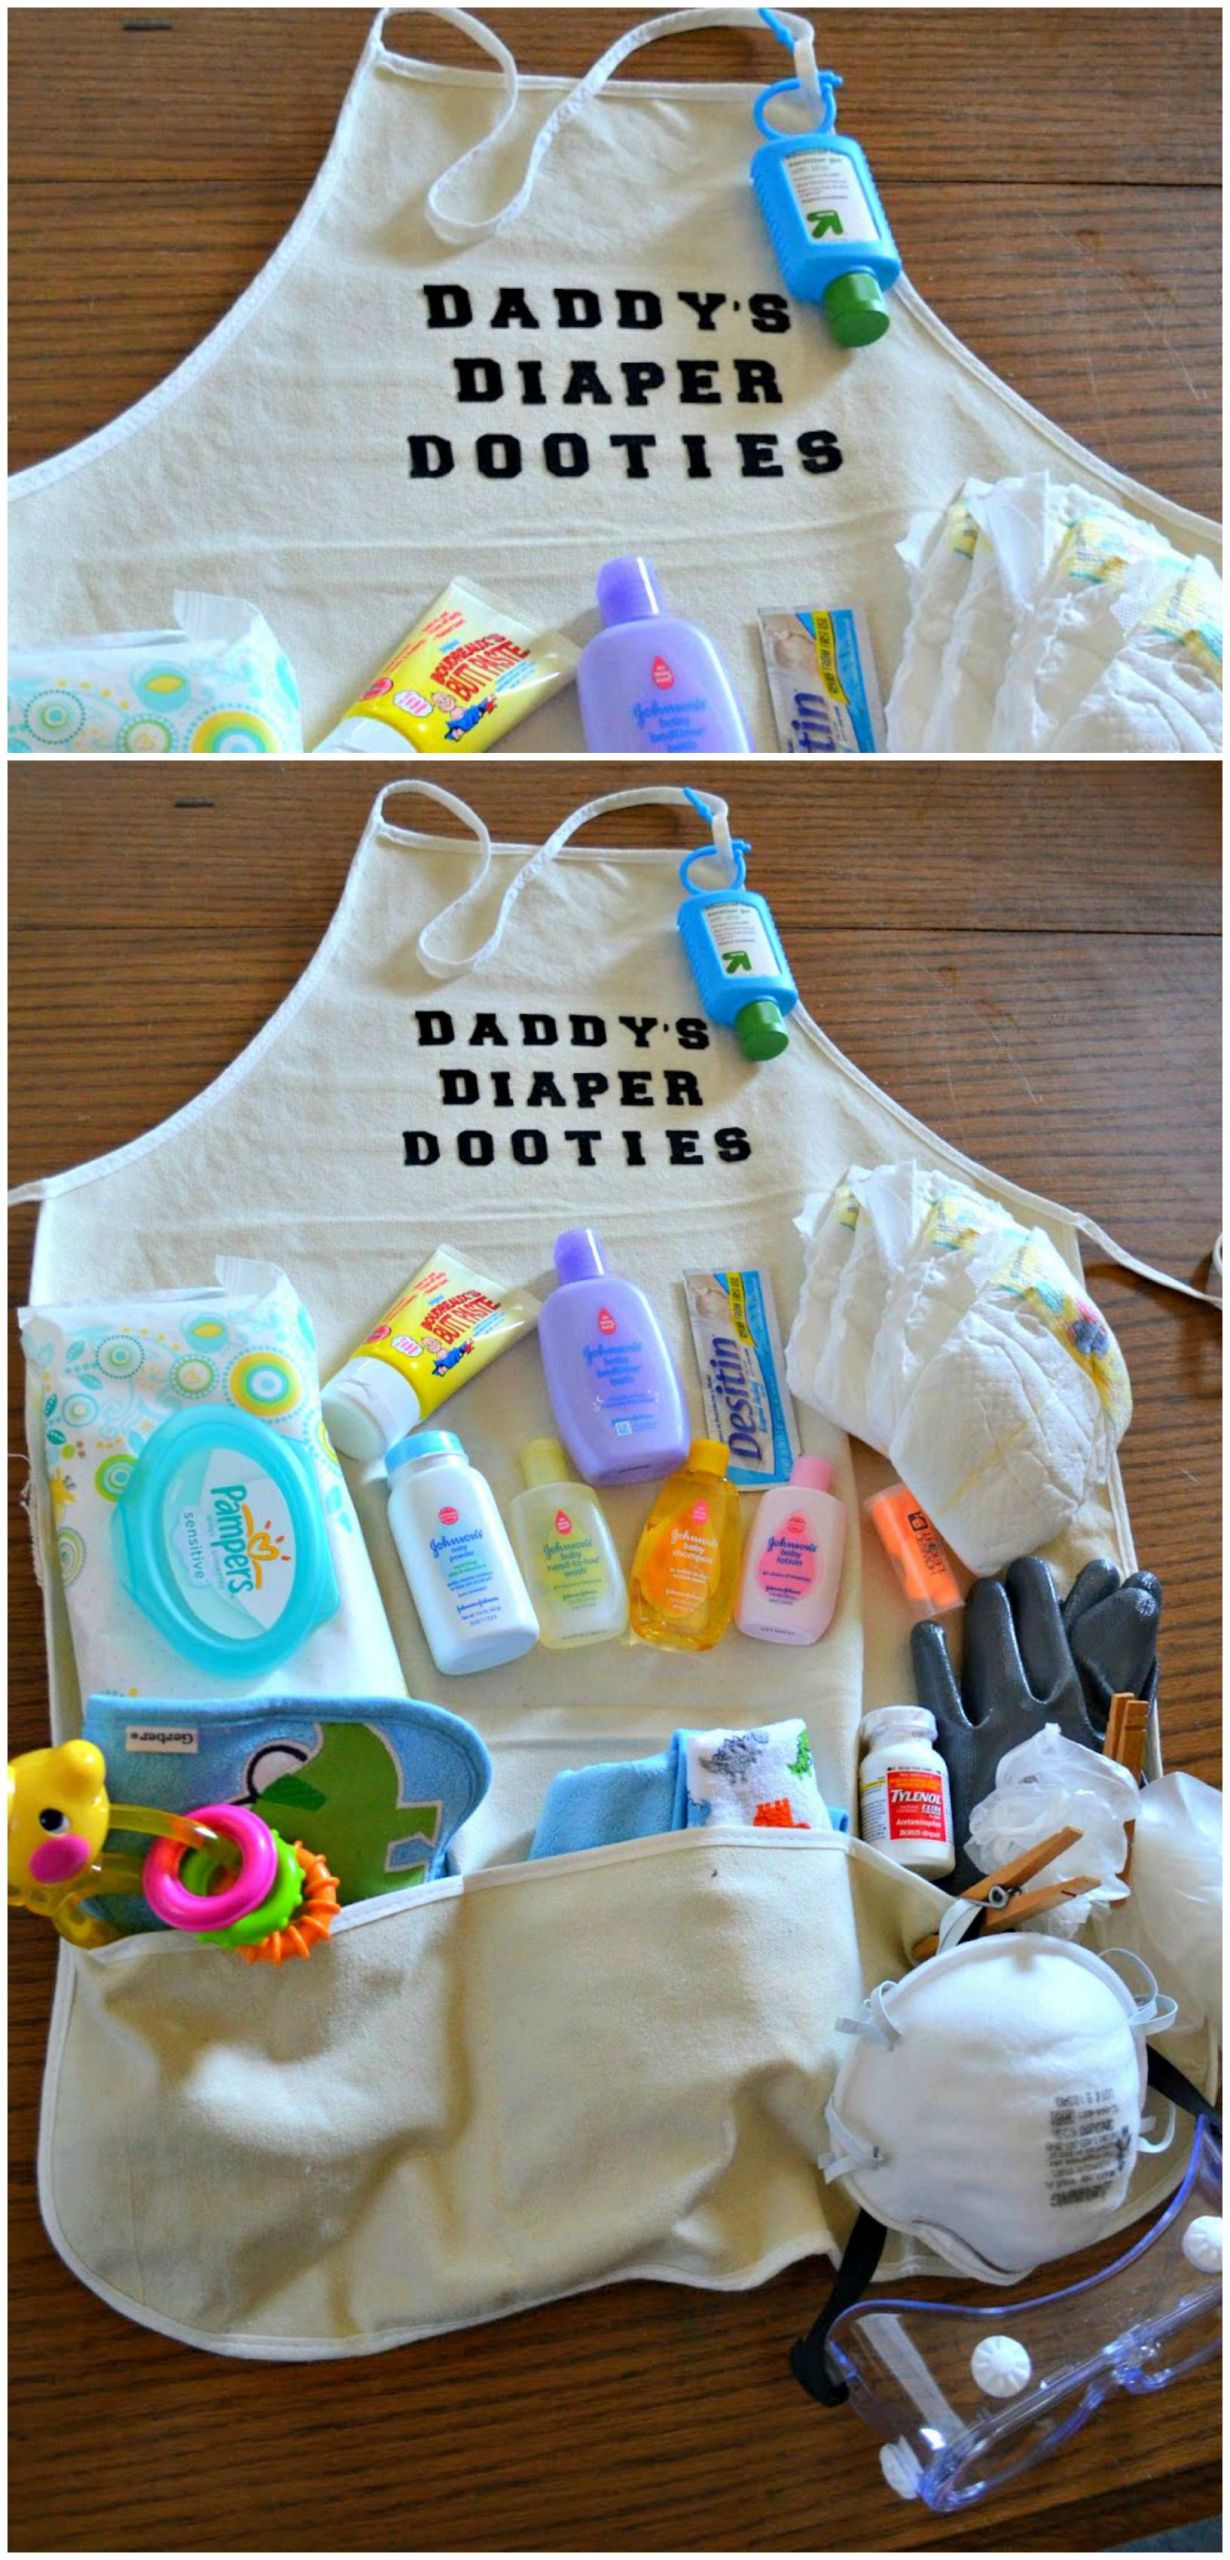 Daddy Baby Shower Gift Ideas
 Daddy s Diaper Dooties Packed with diapers wipes